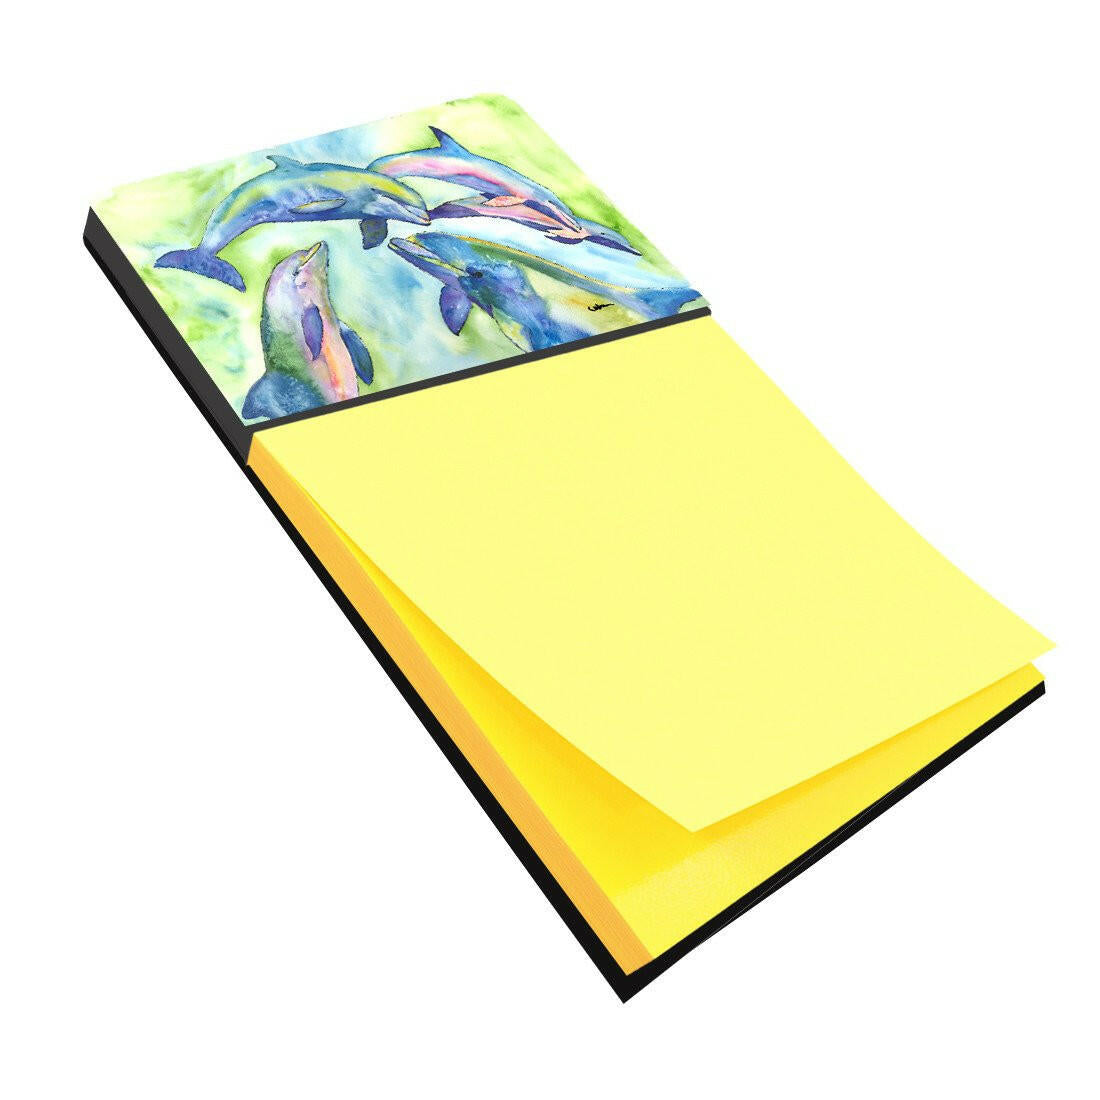 Dolphin Refiillable Sticky Note Holder or Postit Note Dispenser 8548SN by Caroline's Treasures